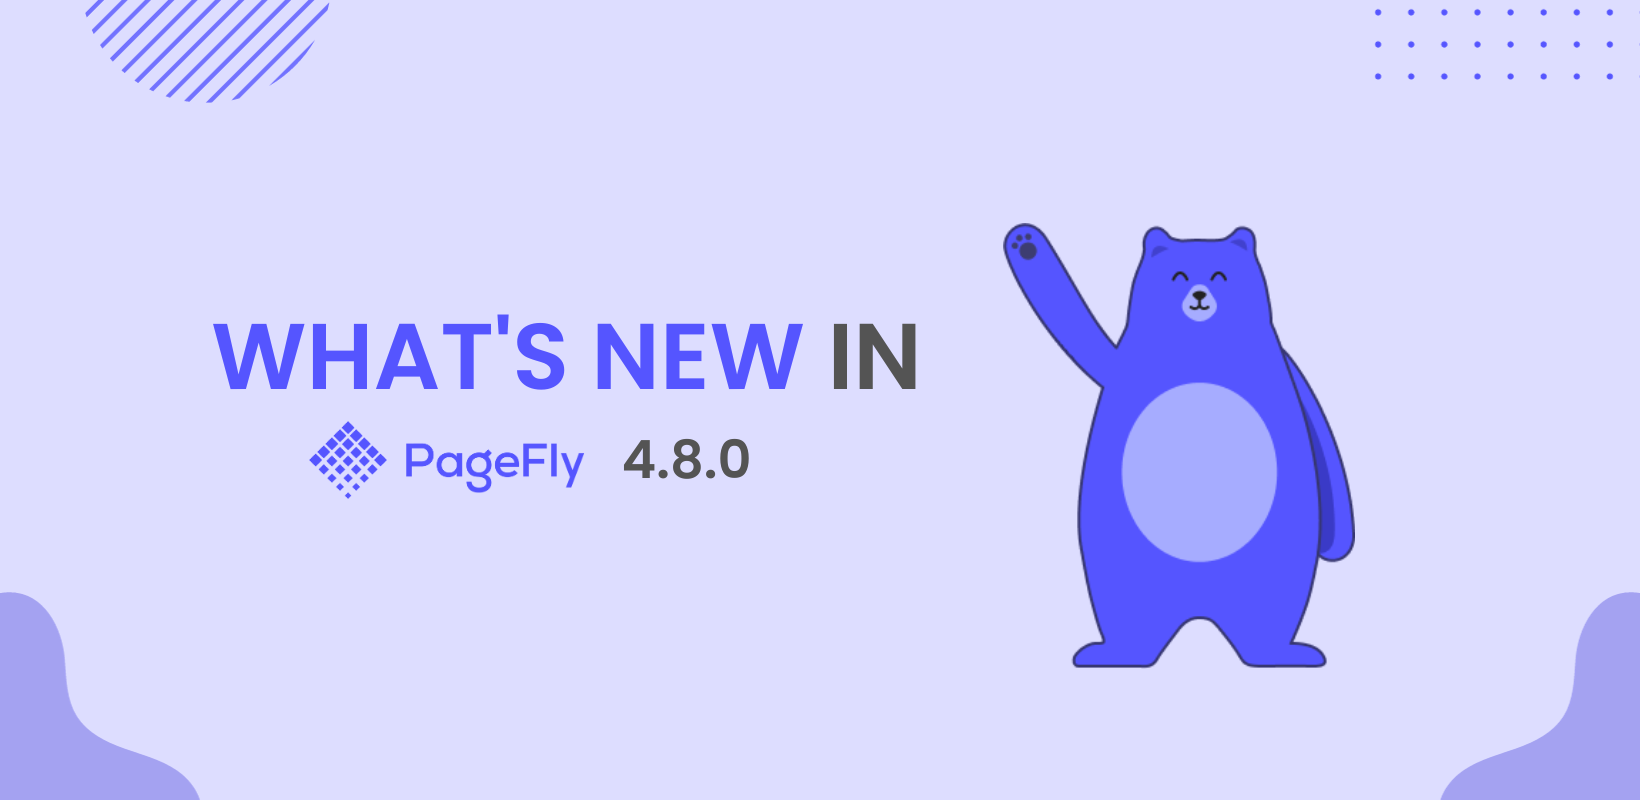 PageFly 4.8.0: 9 New Integrations To Explore A New Game-Changer Experience